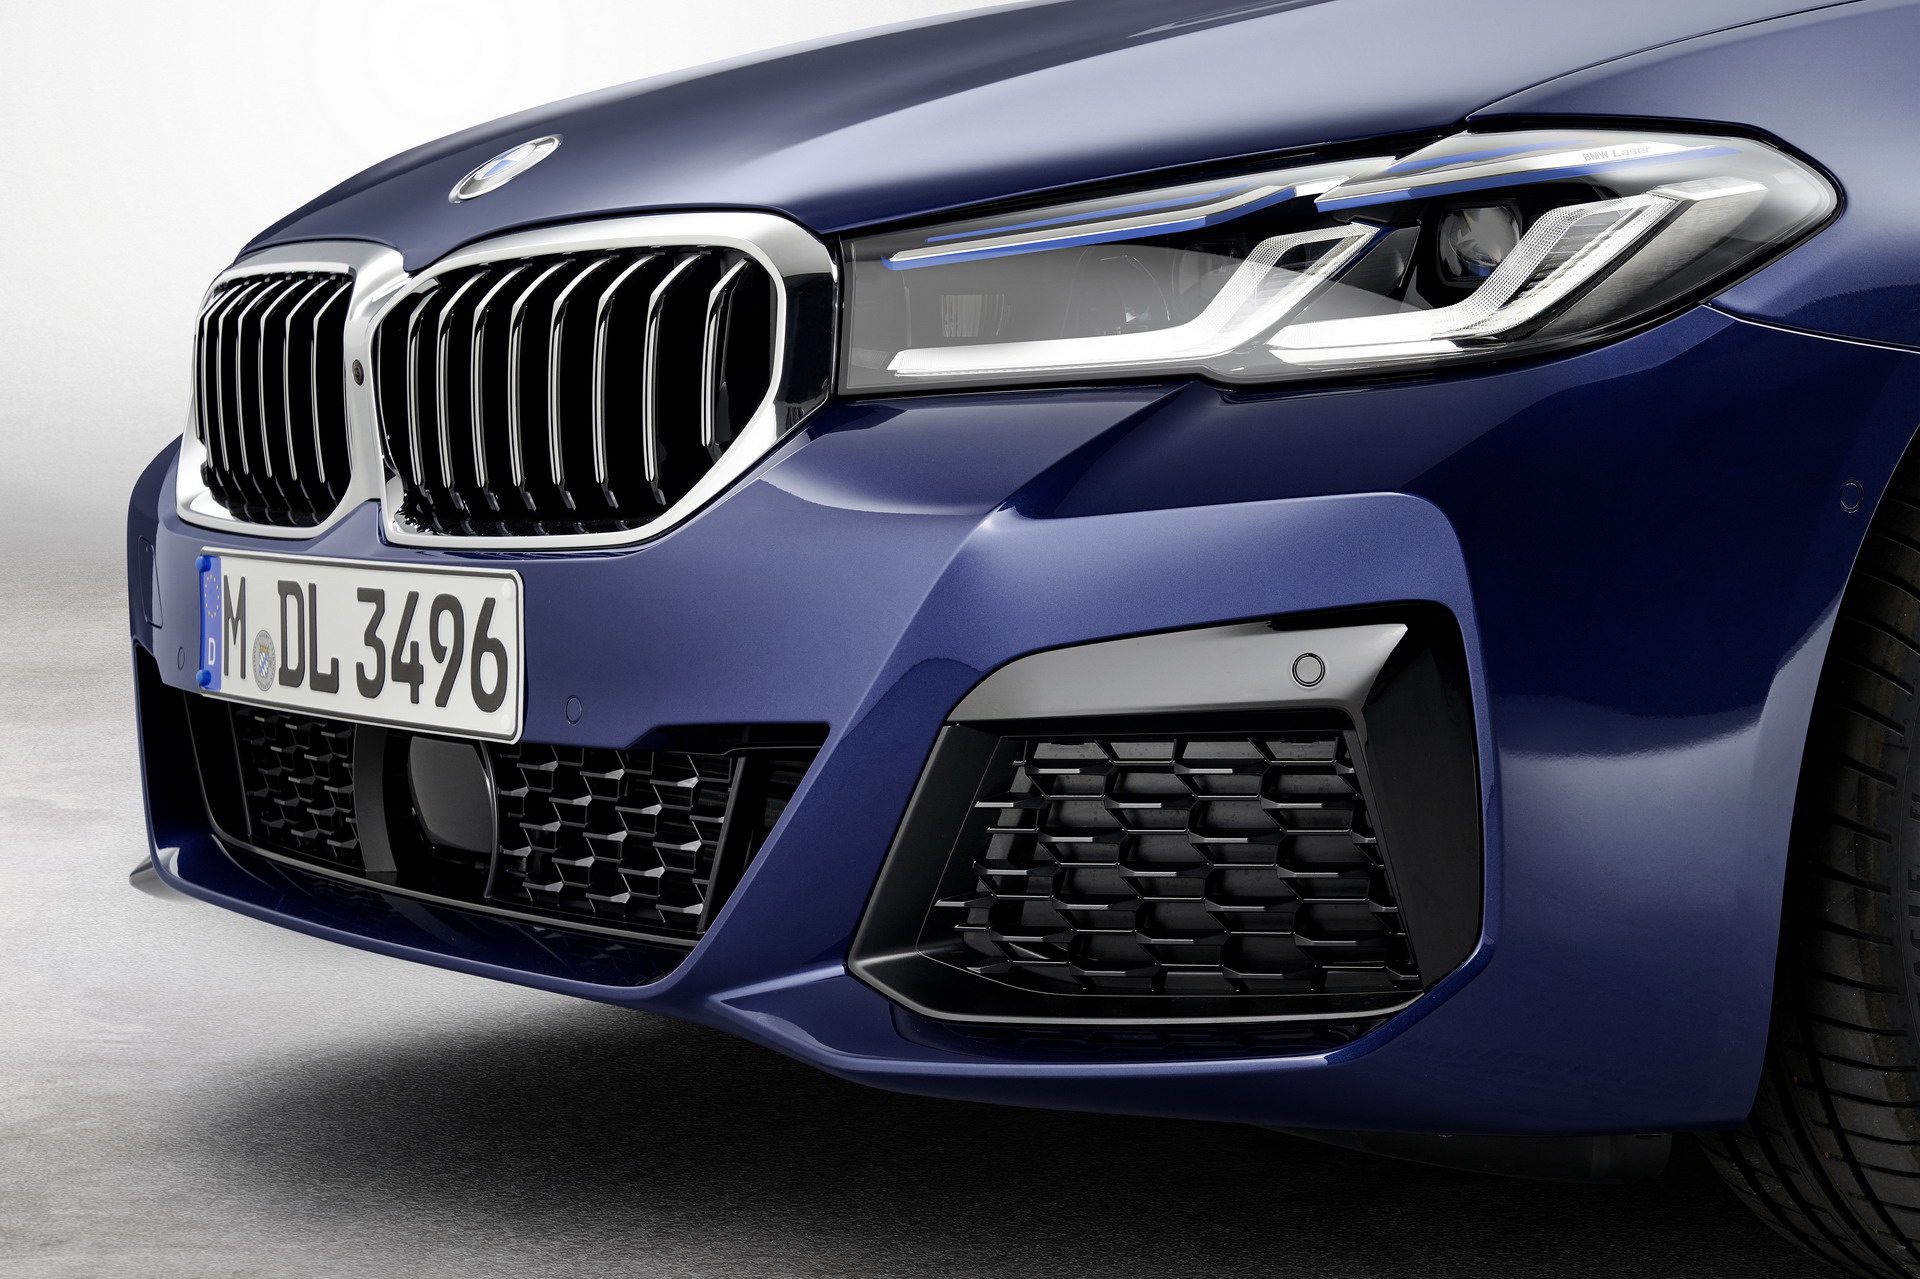 BMW 5 Series to bring M Sport Edition limited-run models